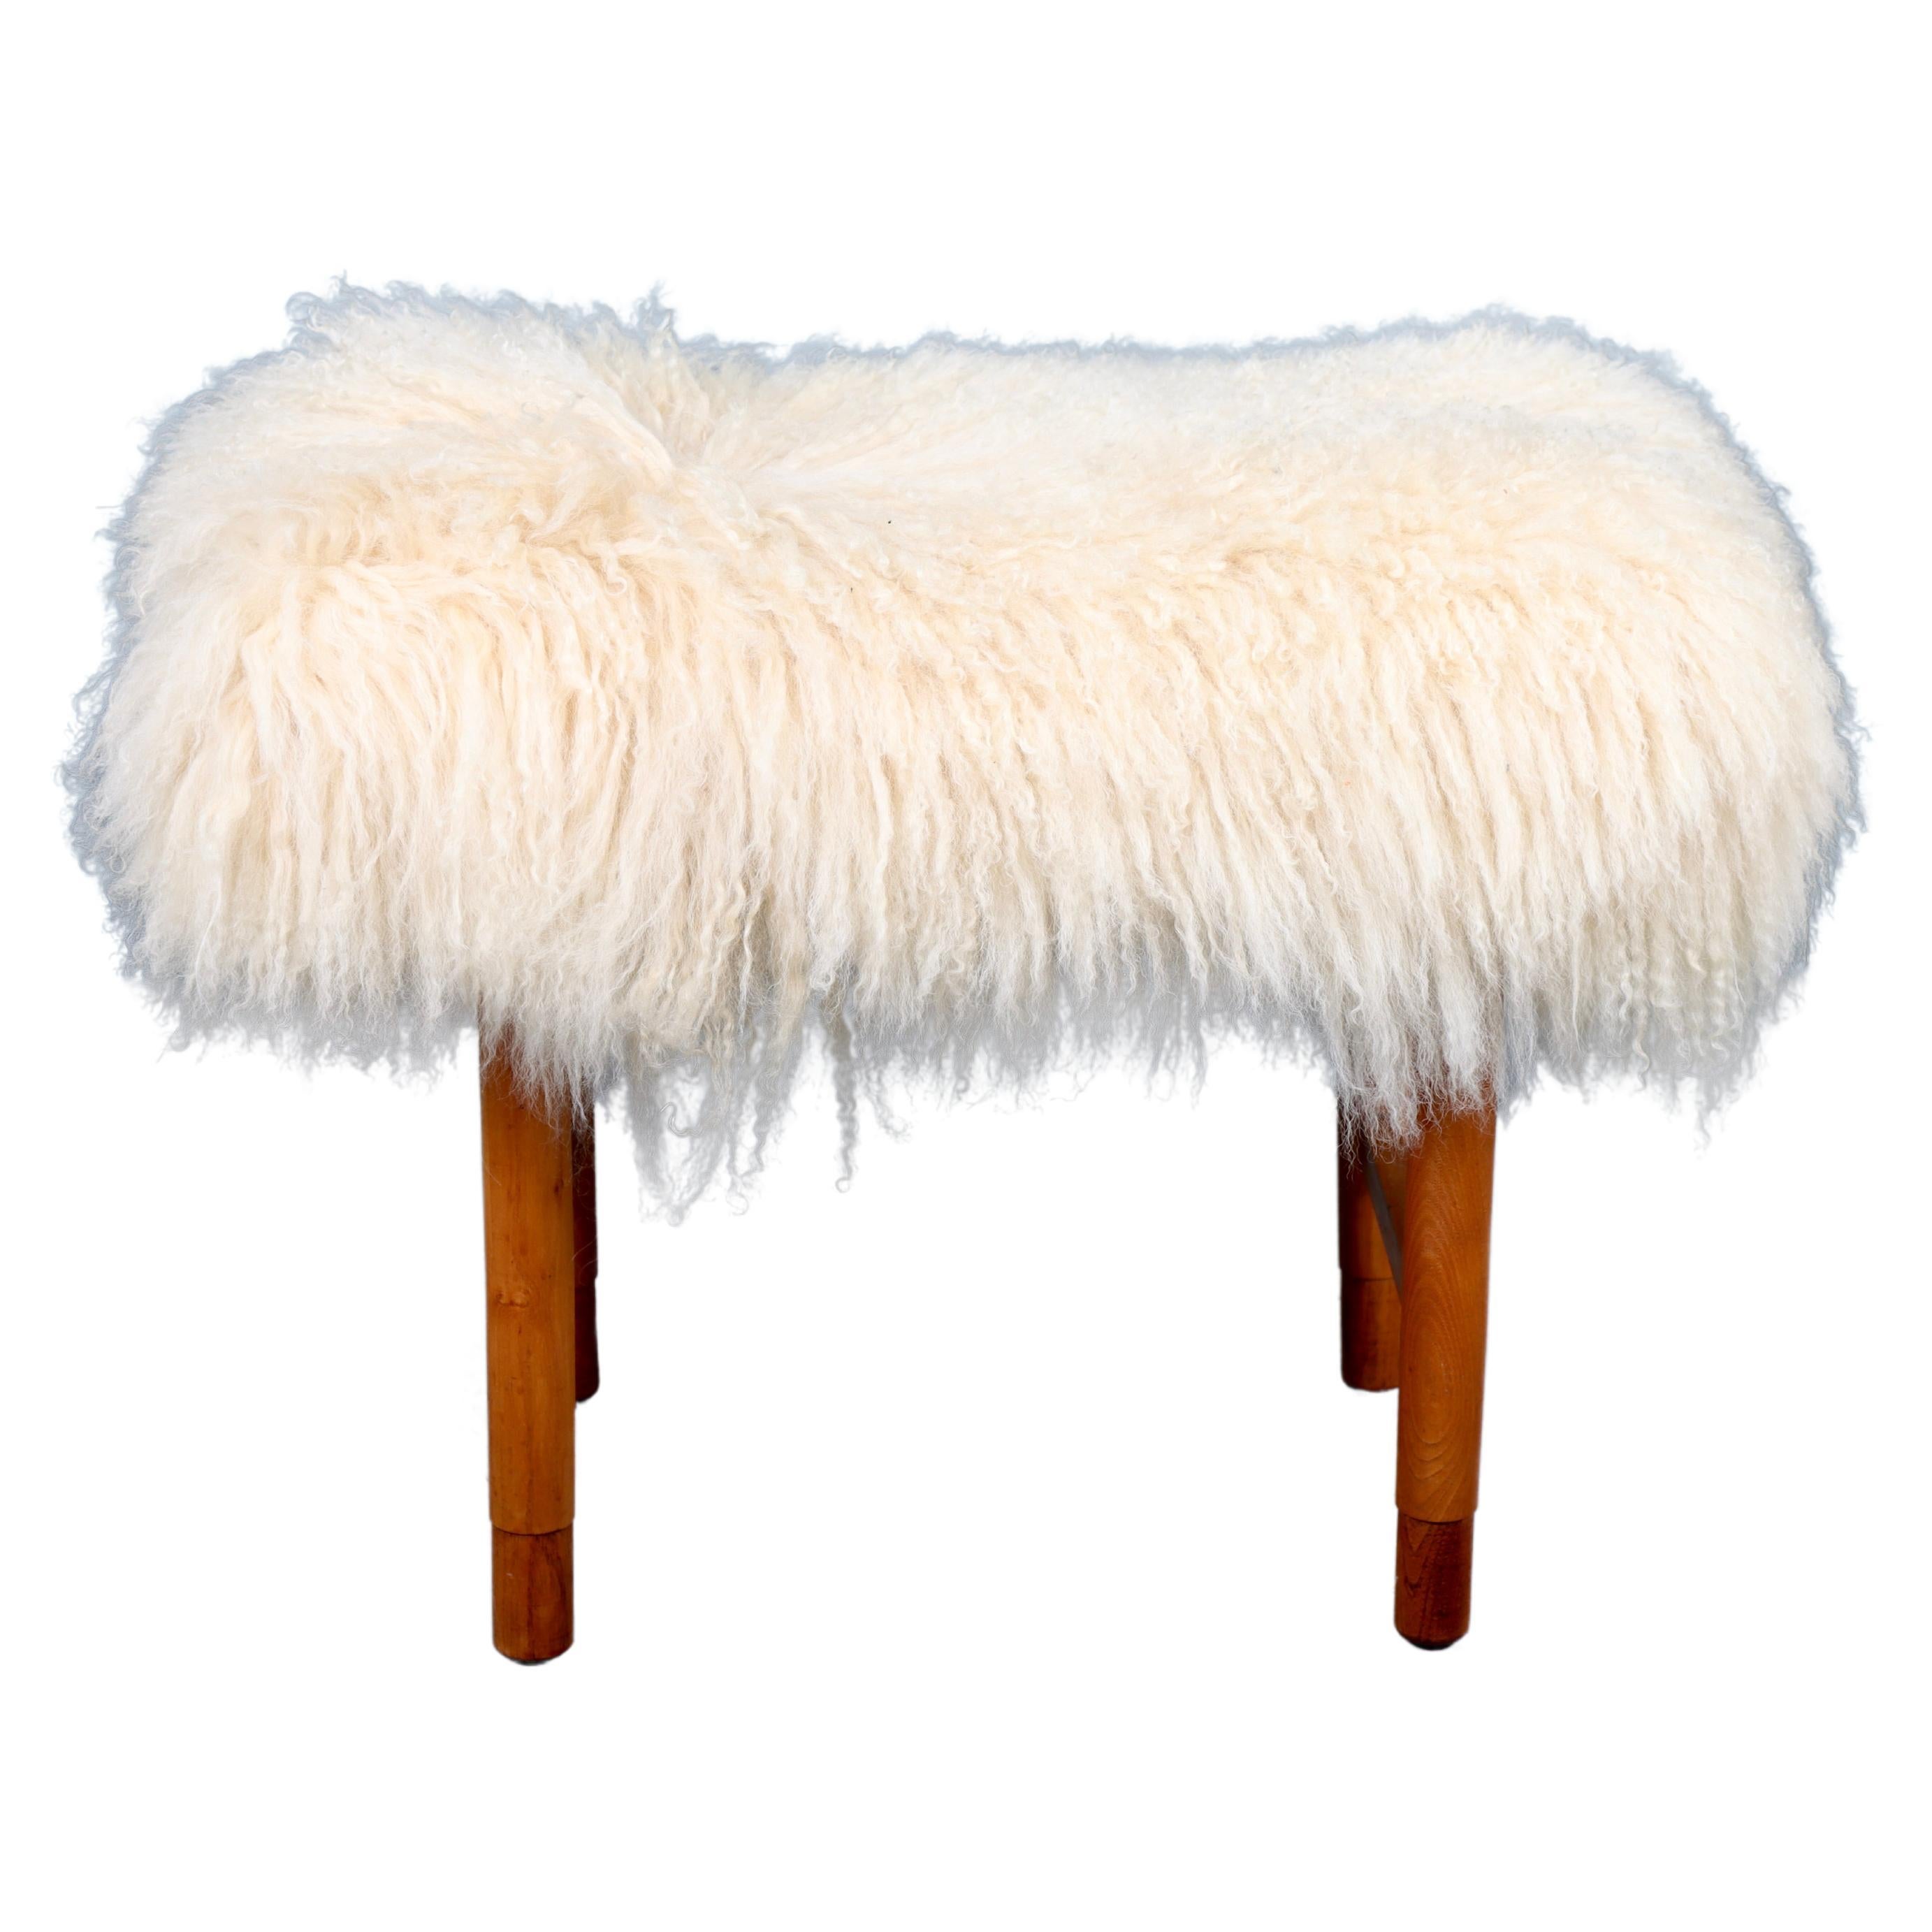 Stool with Sheepskin, Made in Denmark, 1950s In Good Condition For Sale In Lejre, DK